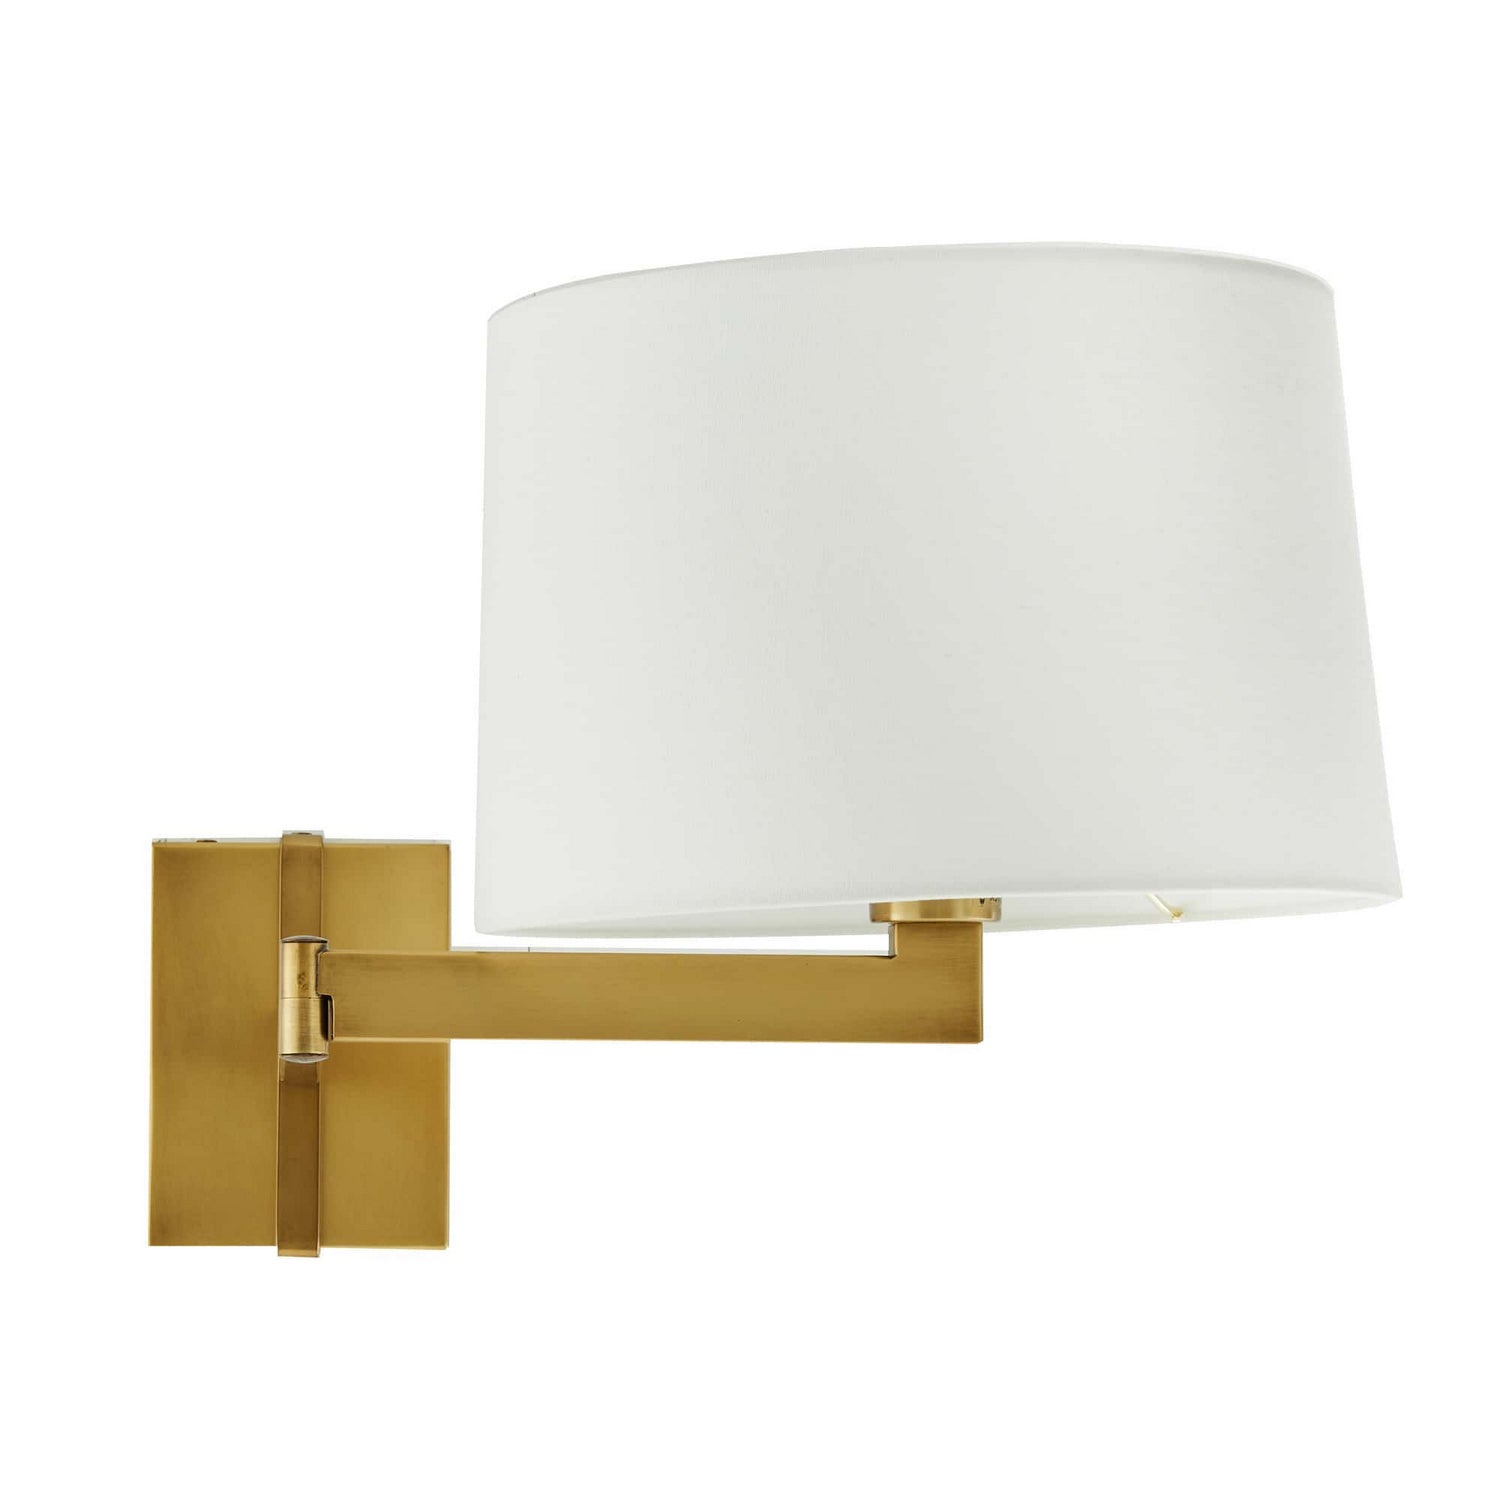 One Light Wall Sconce from the Portland collection in Antique Brass finish